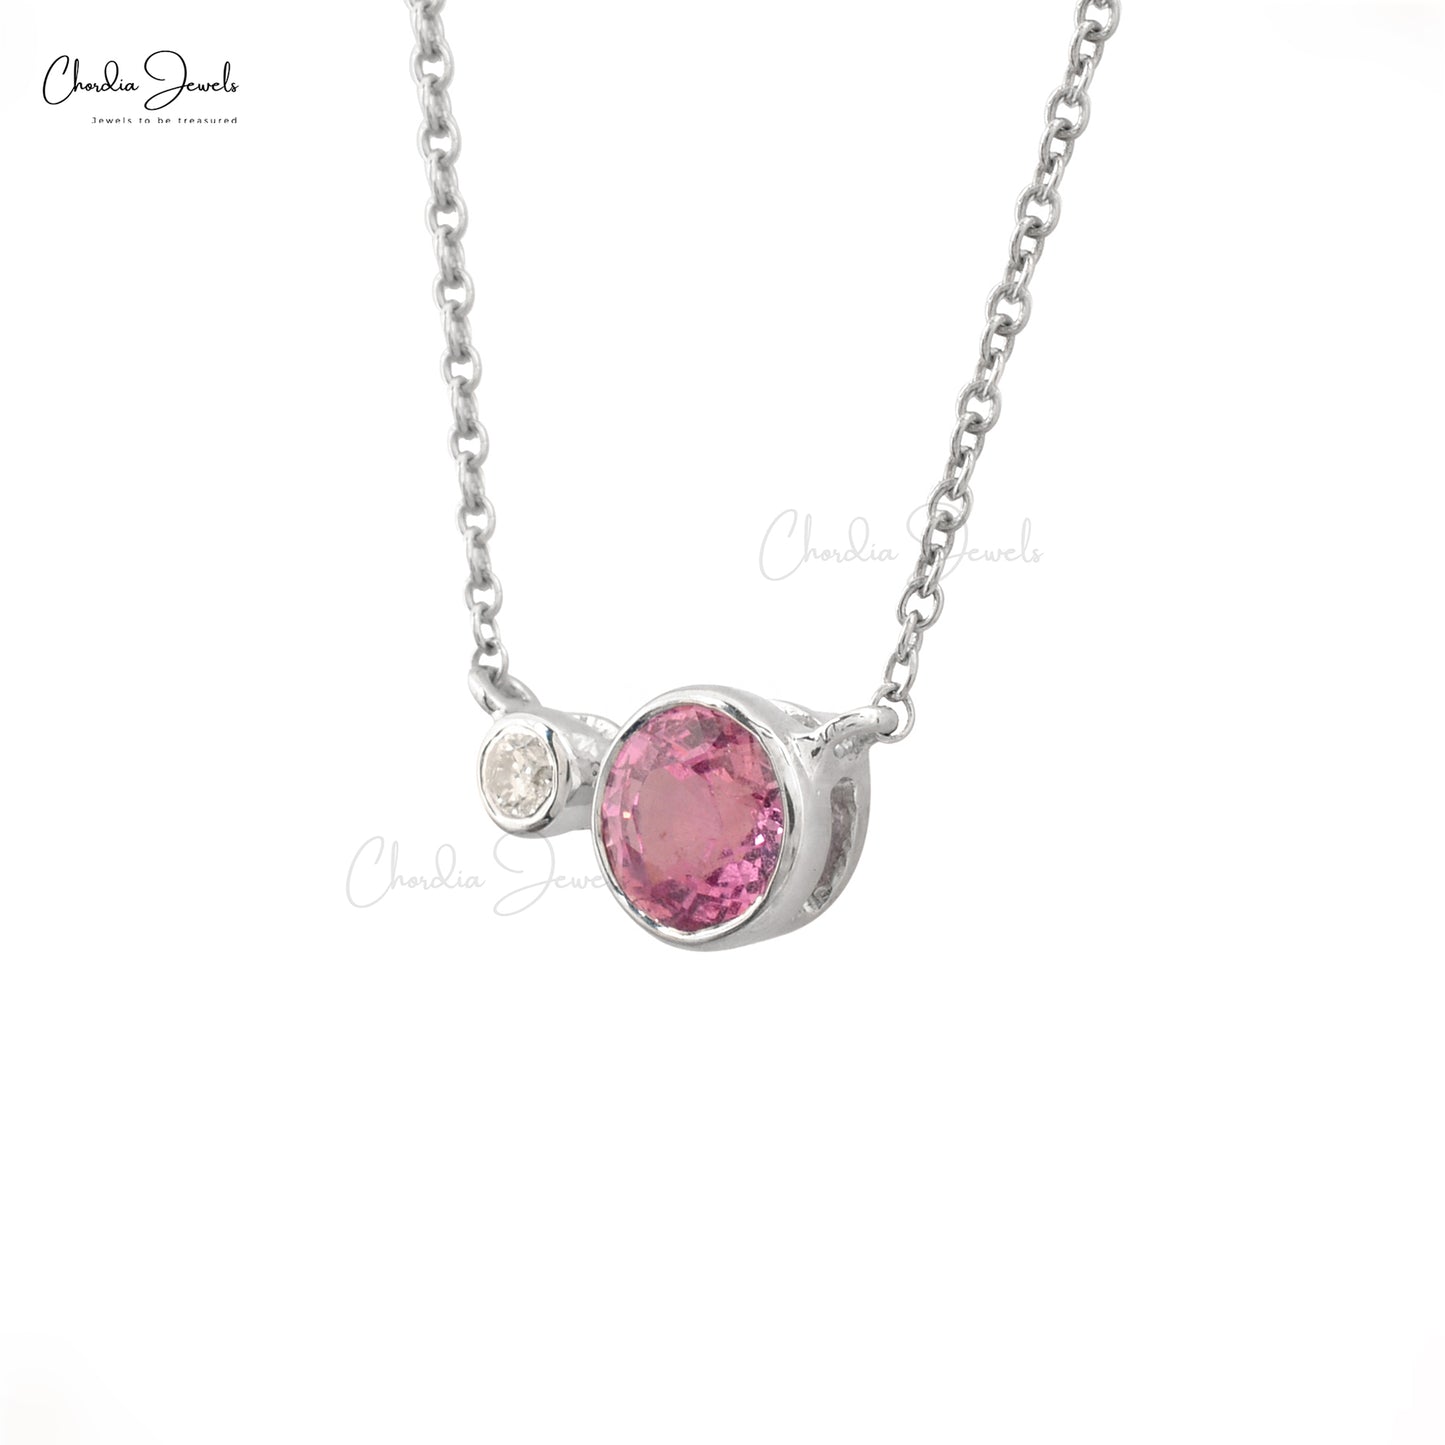 Bezel Set Necklace With 0.6ct Pink Sapphire & Diamond 14k Solid White Gold For Bridesmaid Gift